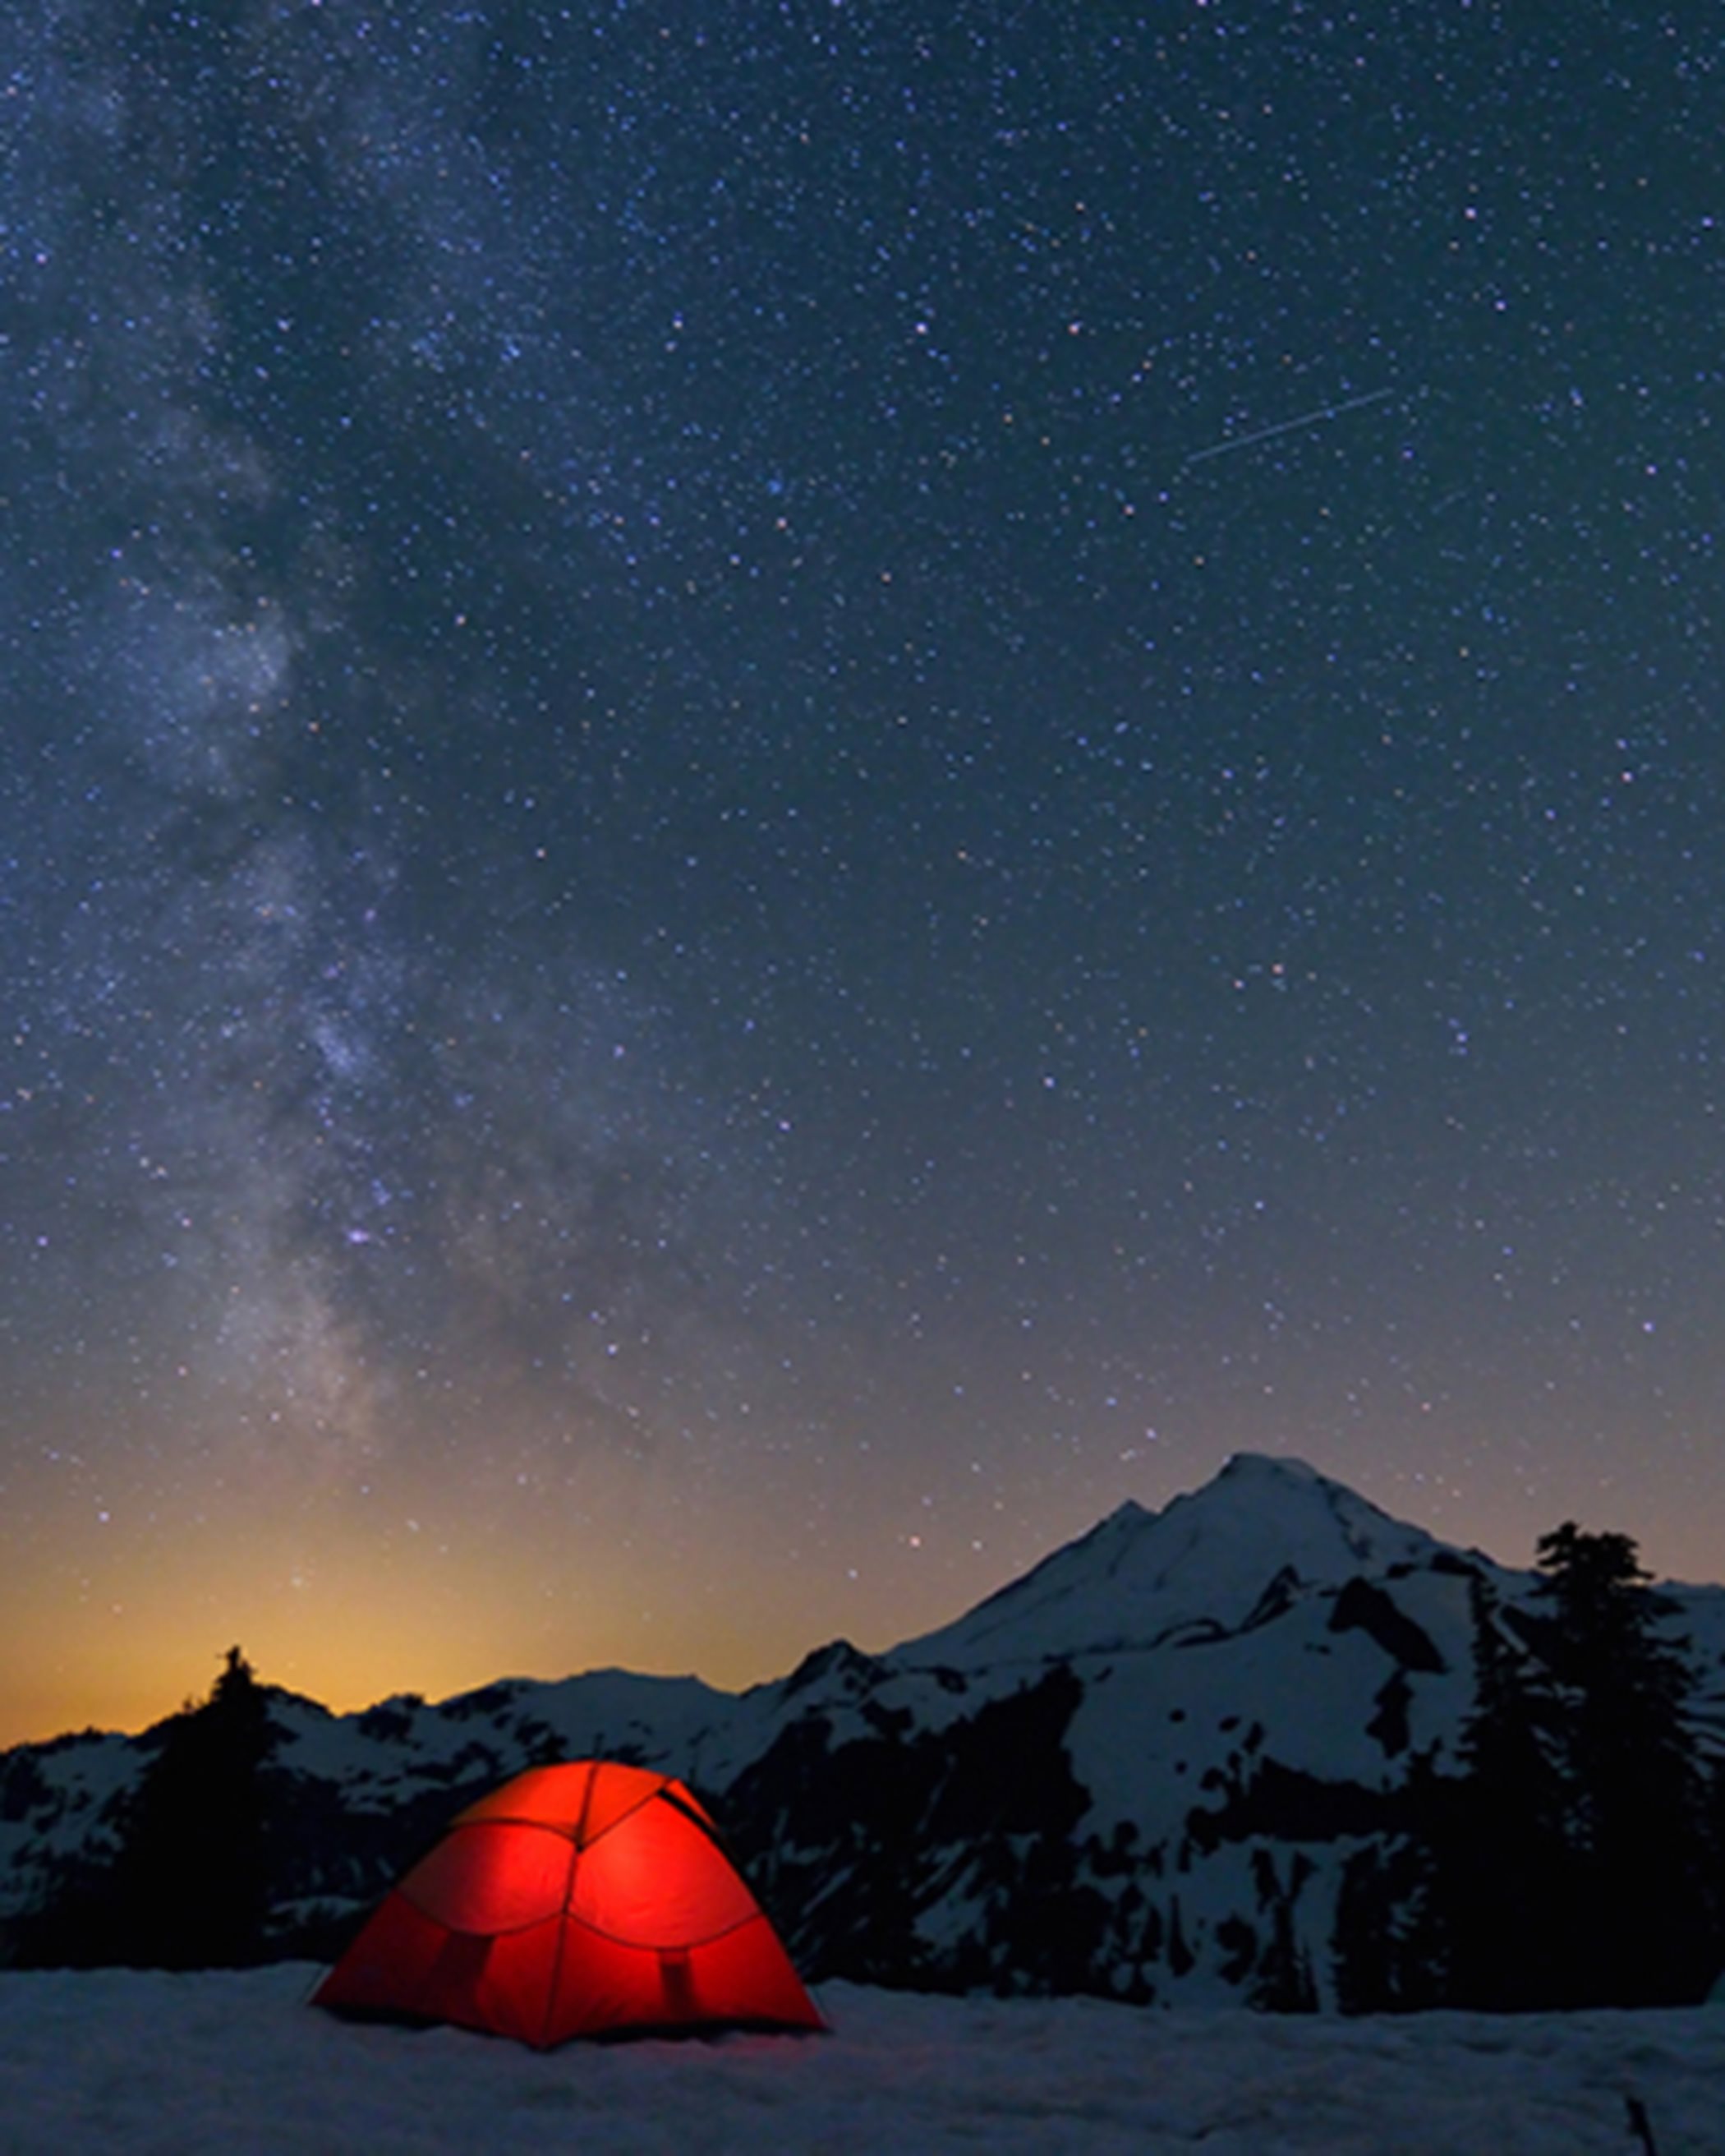 A red tent sits among snowy mountains and twilight night with lots of stars